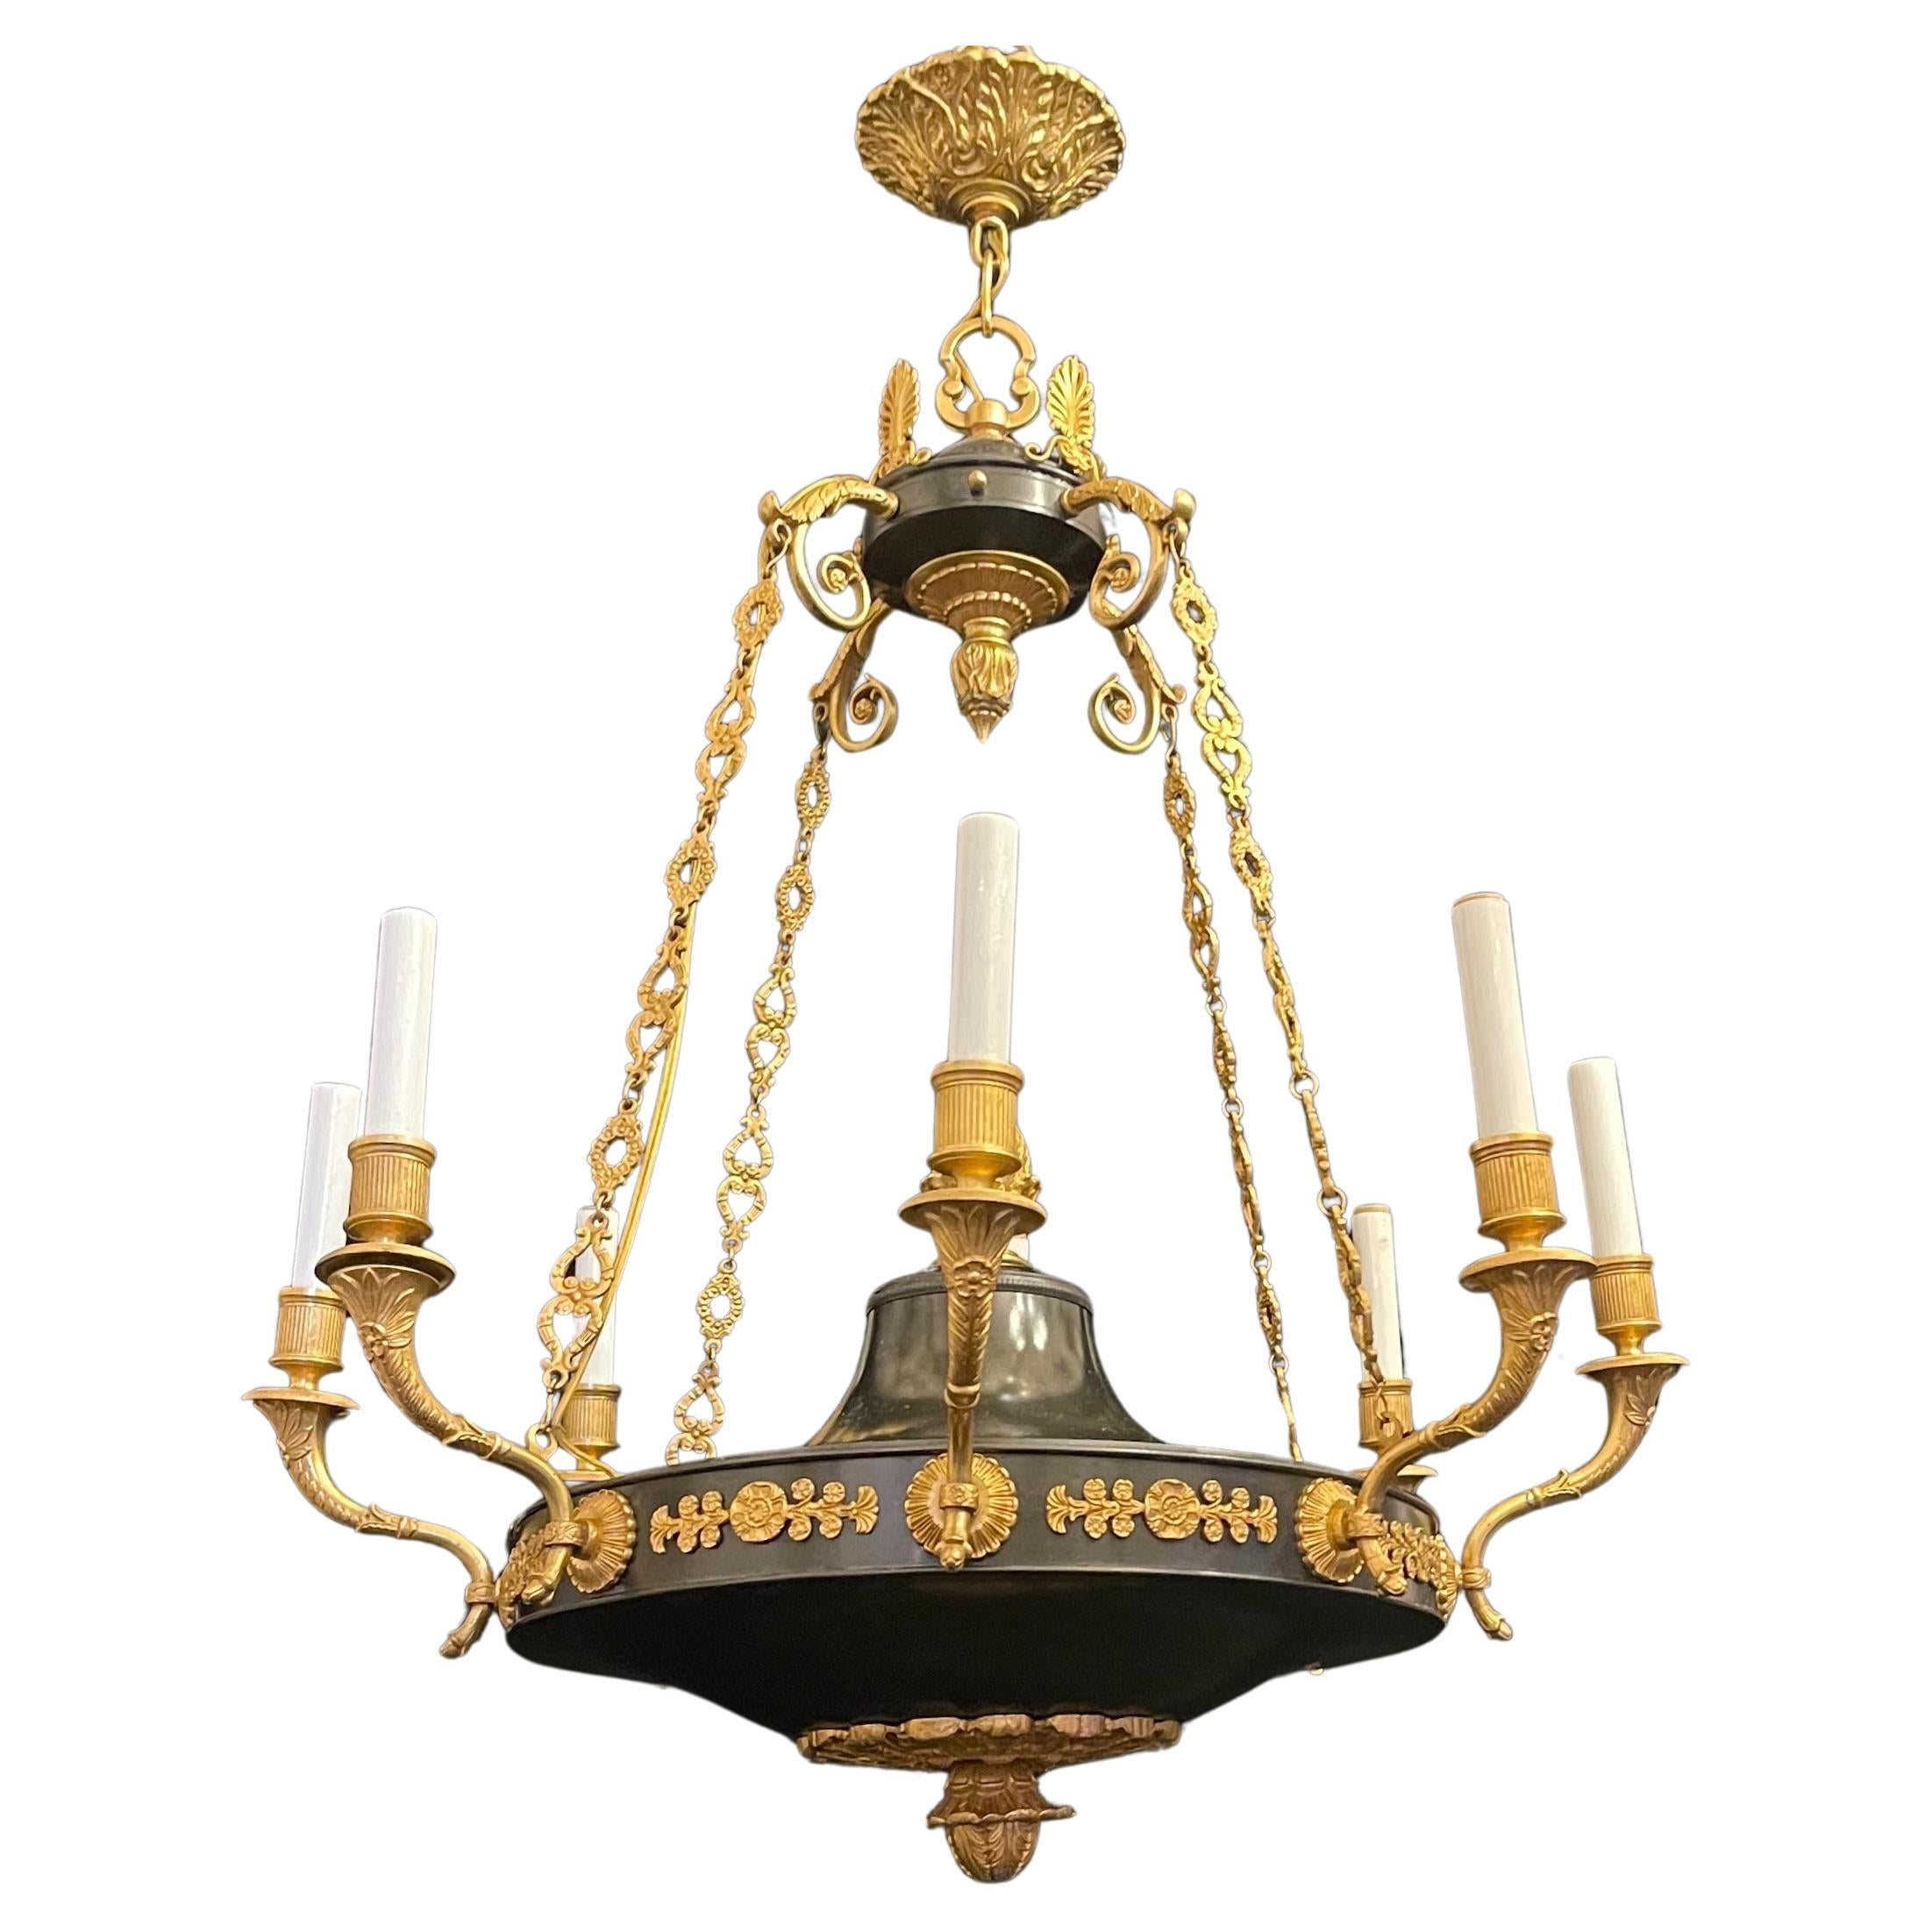 Wonderful French Empire Neoclassical Patinated Ormolu Bronze Chandelier Fixture